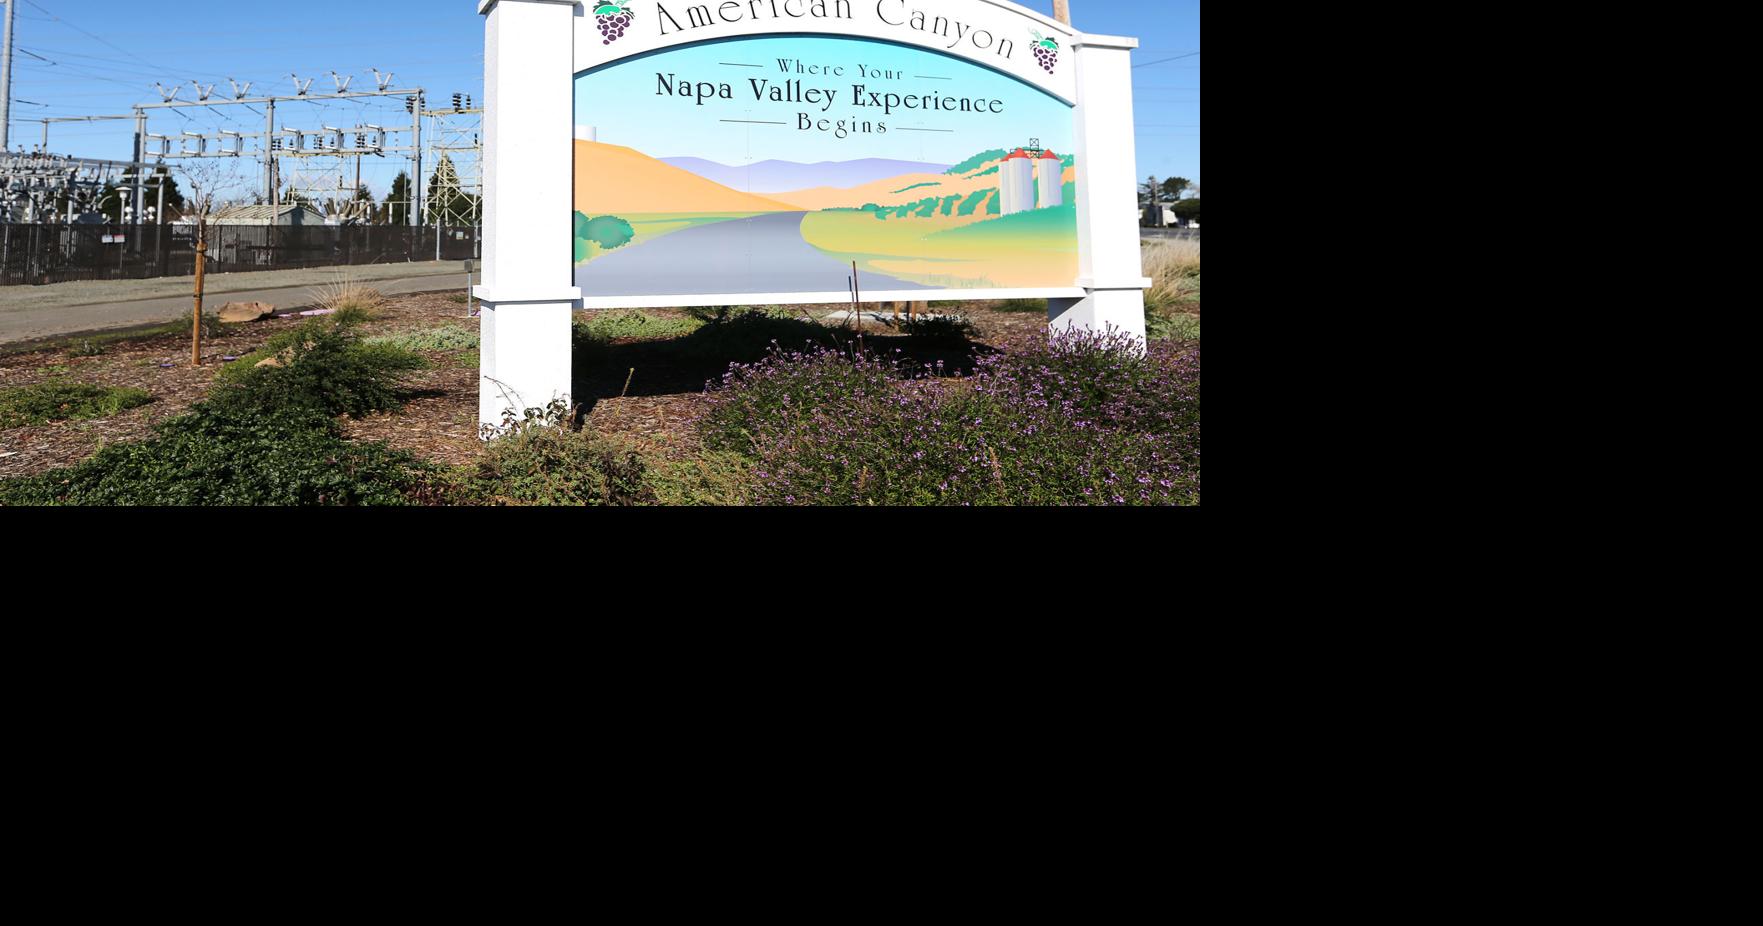 American Canyon wants landscaping between welcome sign and substation | Local News